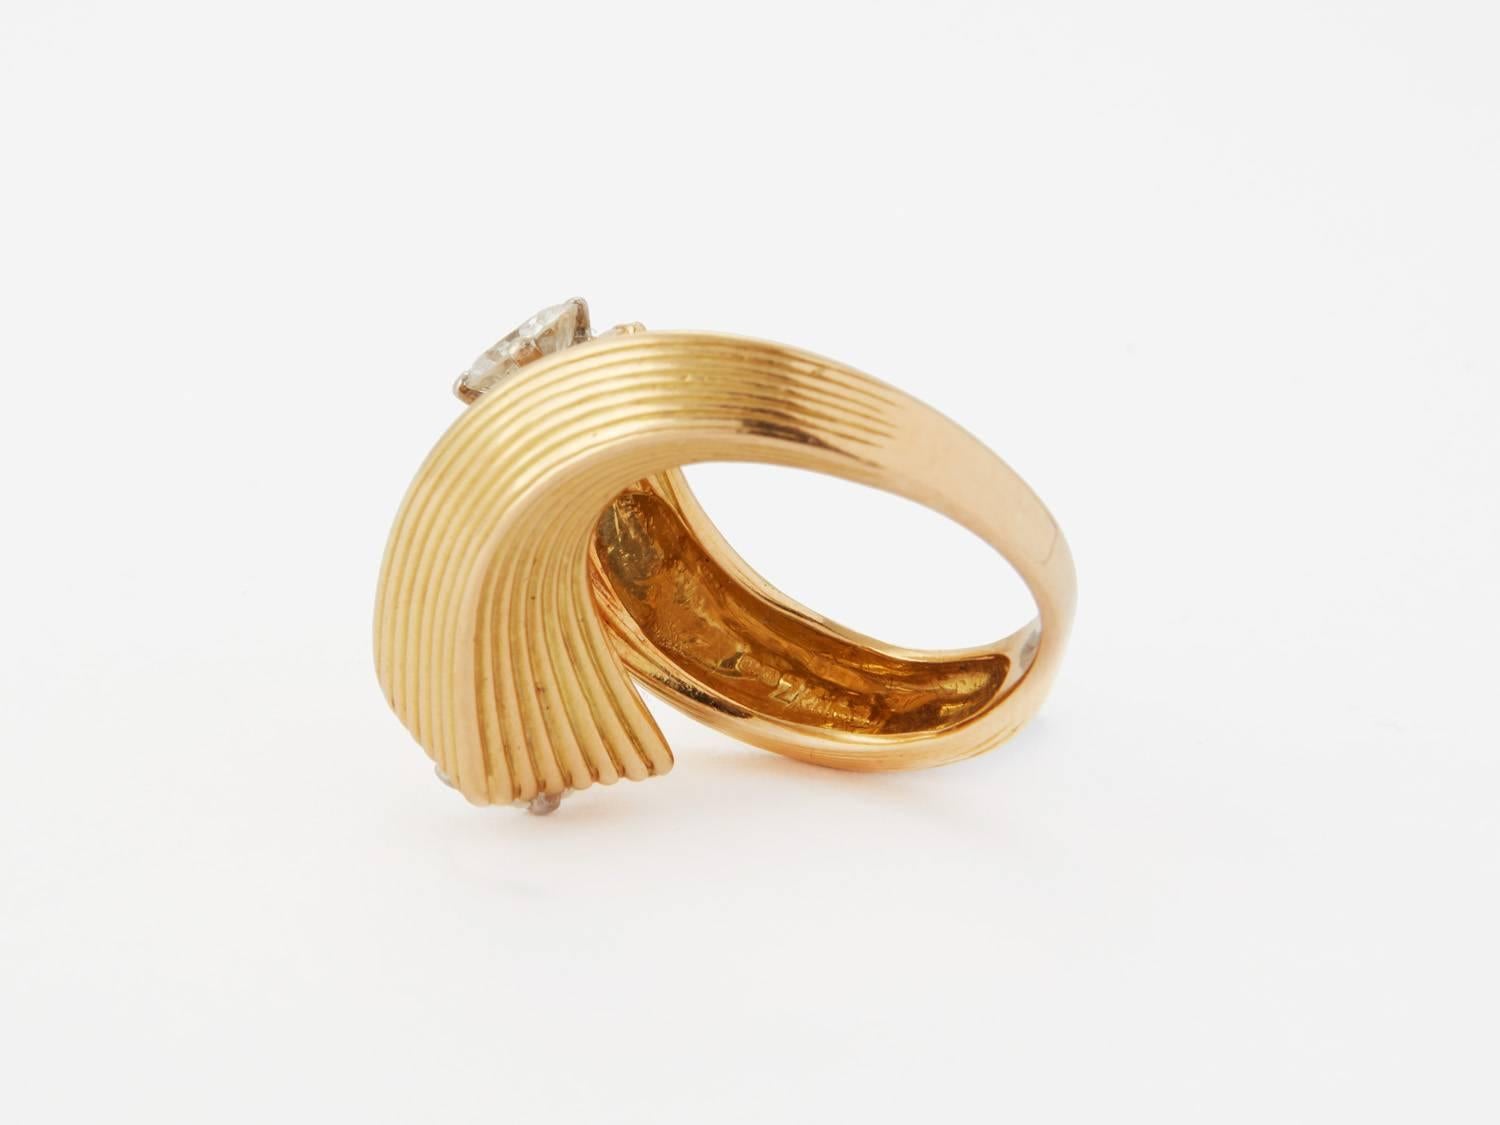 Kutchinsky Twist Ring, 1969, signed Kutchinsky and stamped with London Hallmarks with date letter 'o'

18k gold with 2 diamonds; ring size: P

The Kutchinsky family business was established in the 1980's in England, setting up a jewellery